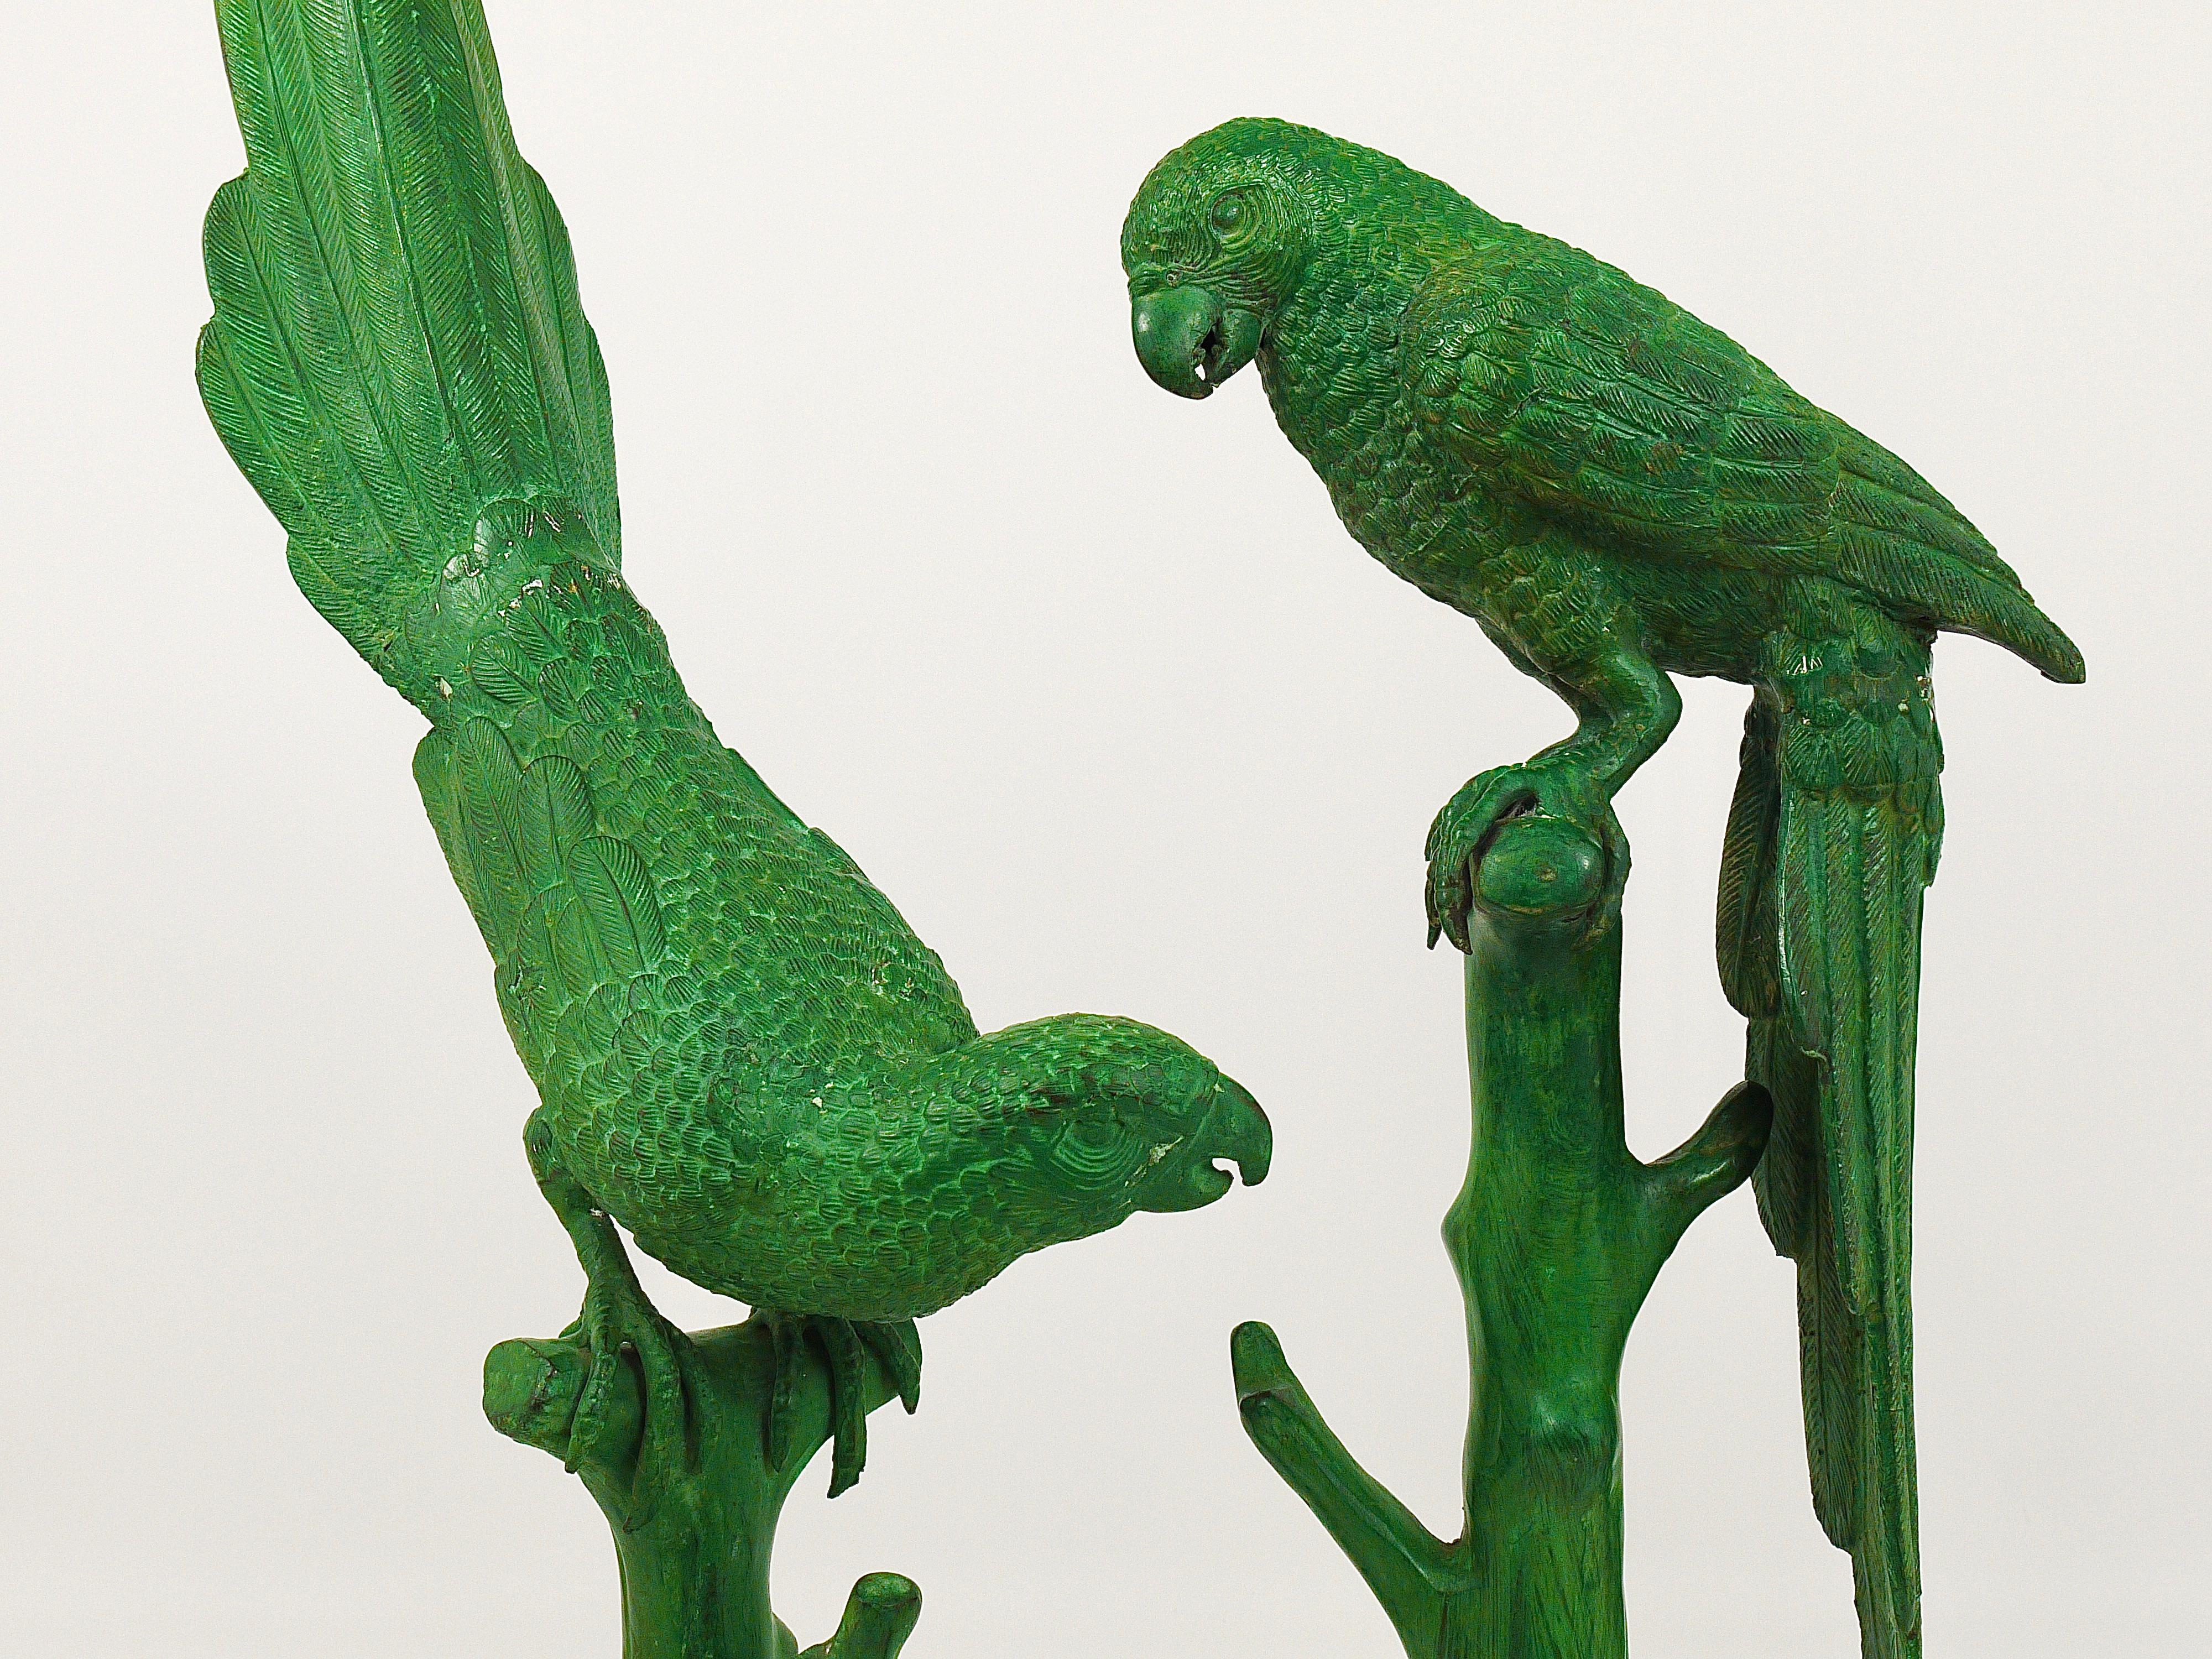 Two beautiful and large French bronze sculptures / figurines from the 1970s, displaying parrots sitting on a branch. Very impressive and decorative objects in good condition. Measures: Height 25 and 34 inches. Sold and prices per piece.